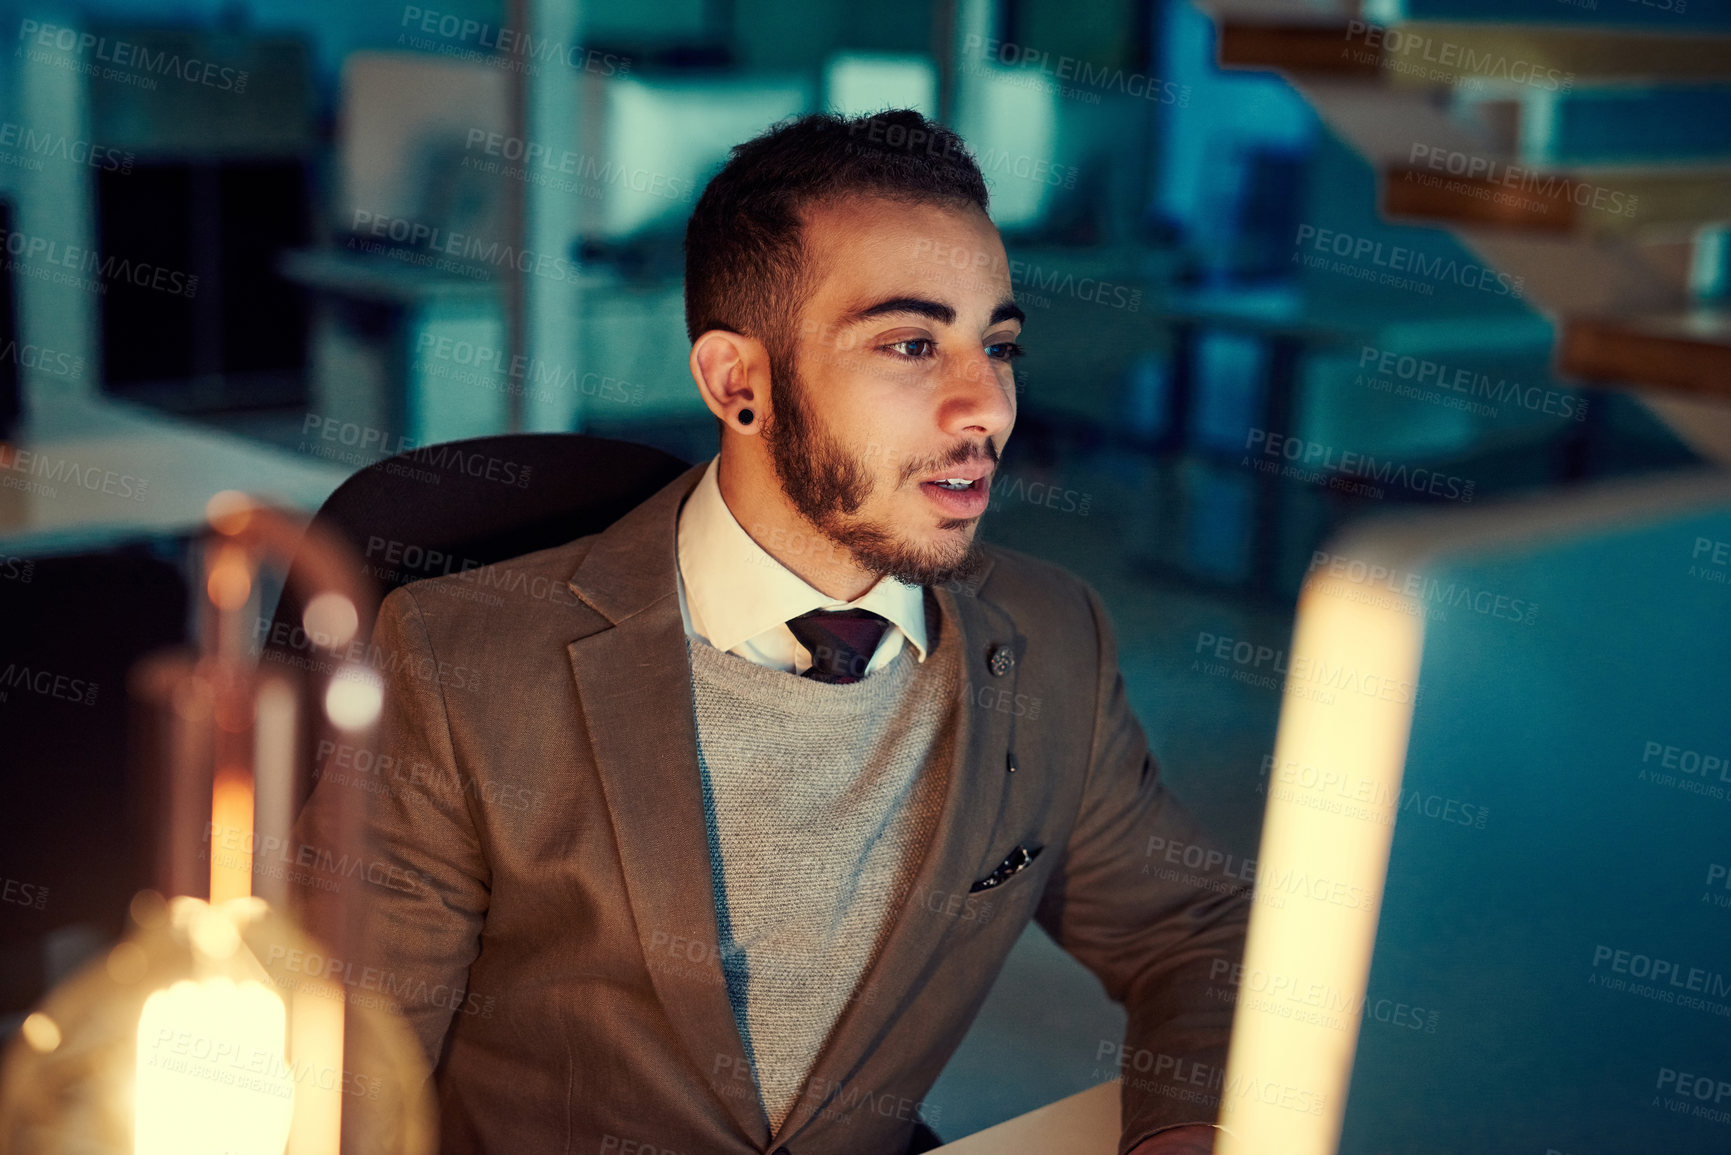 Buy stock photo Shot of a young businessman working late in an office